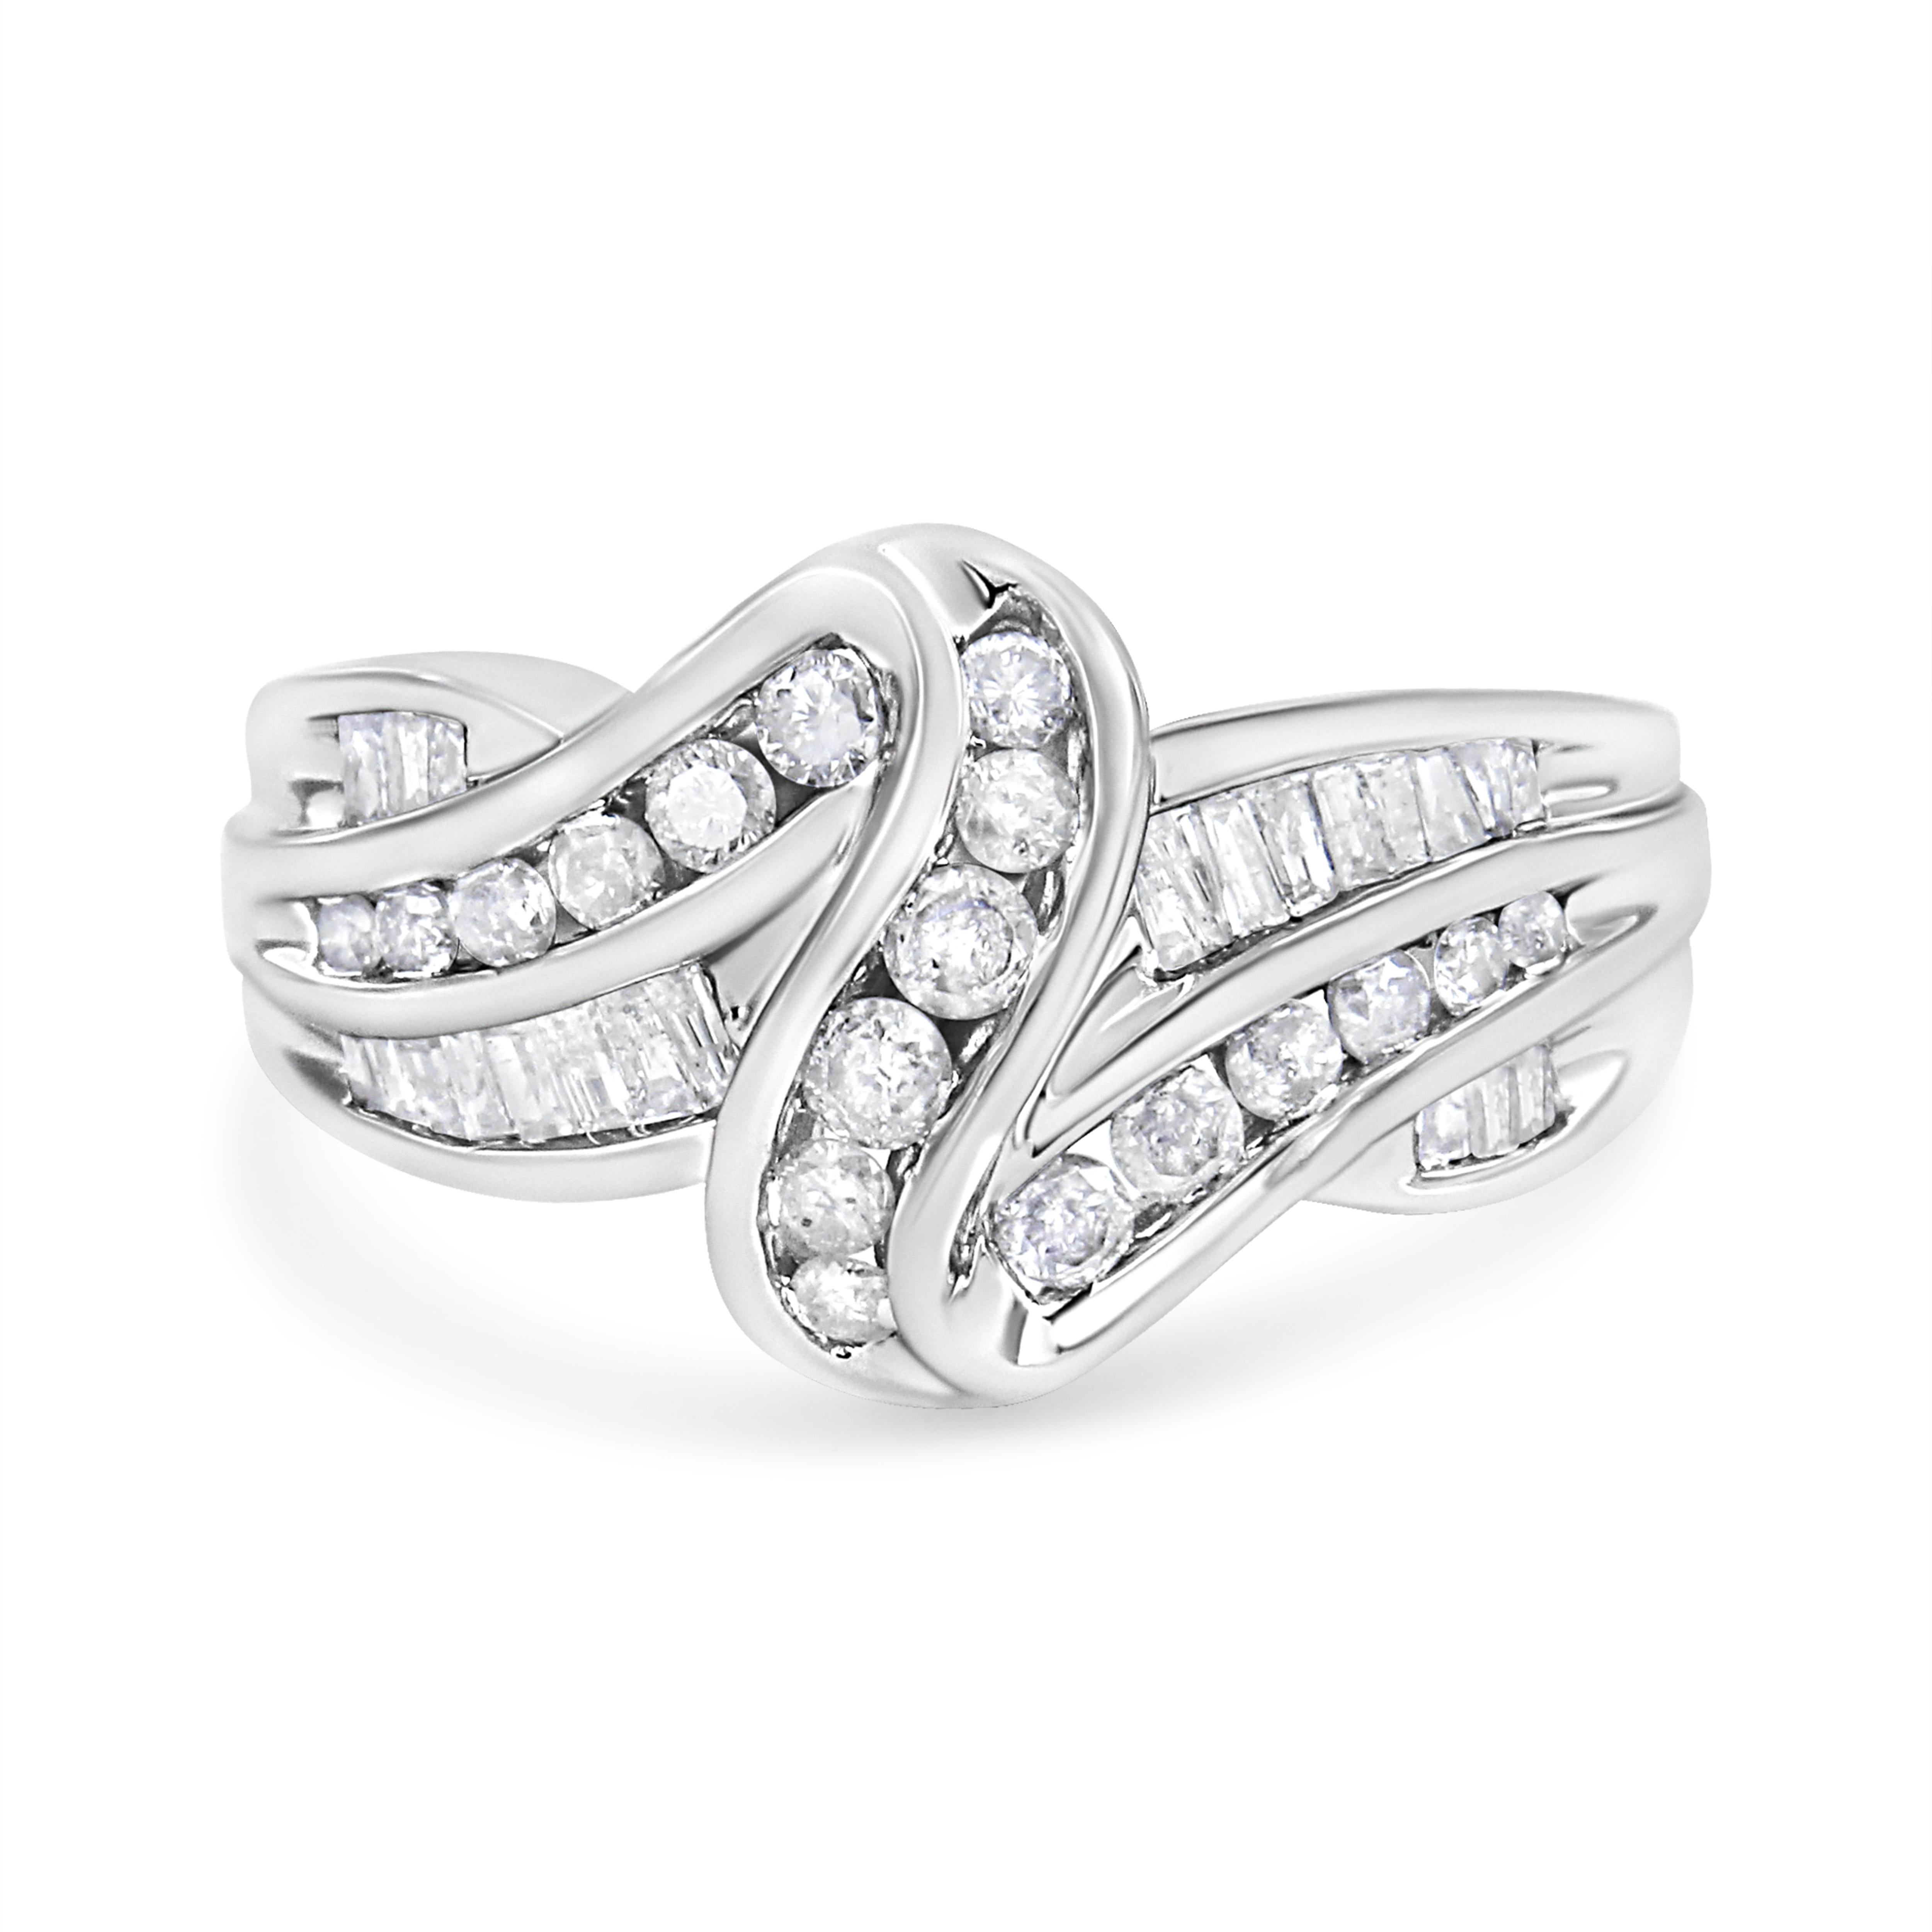 Natural diamonds and gleaming gold interlock each other to create this eye-catching bypass ring design. Created in shining 10k white gold, this ring will sit so elegantly on your finger and sparkle with 3/4 carats of diamonds. An assortment of round